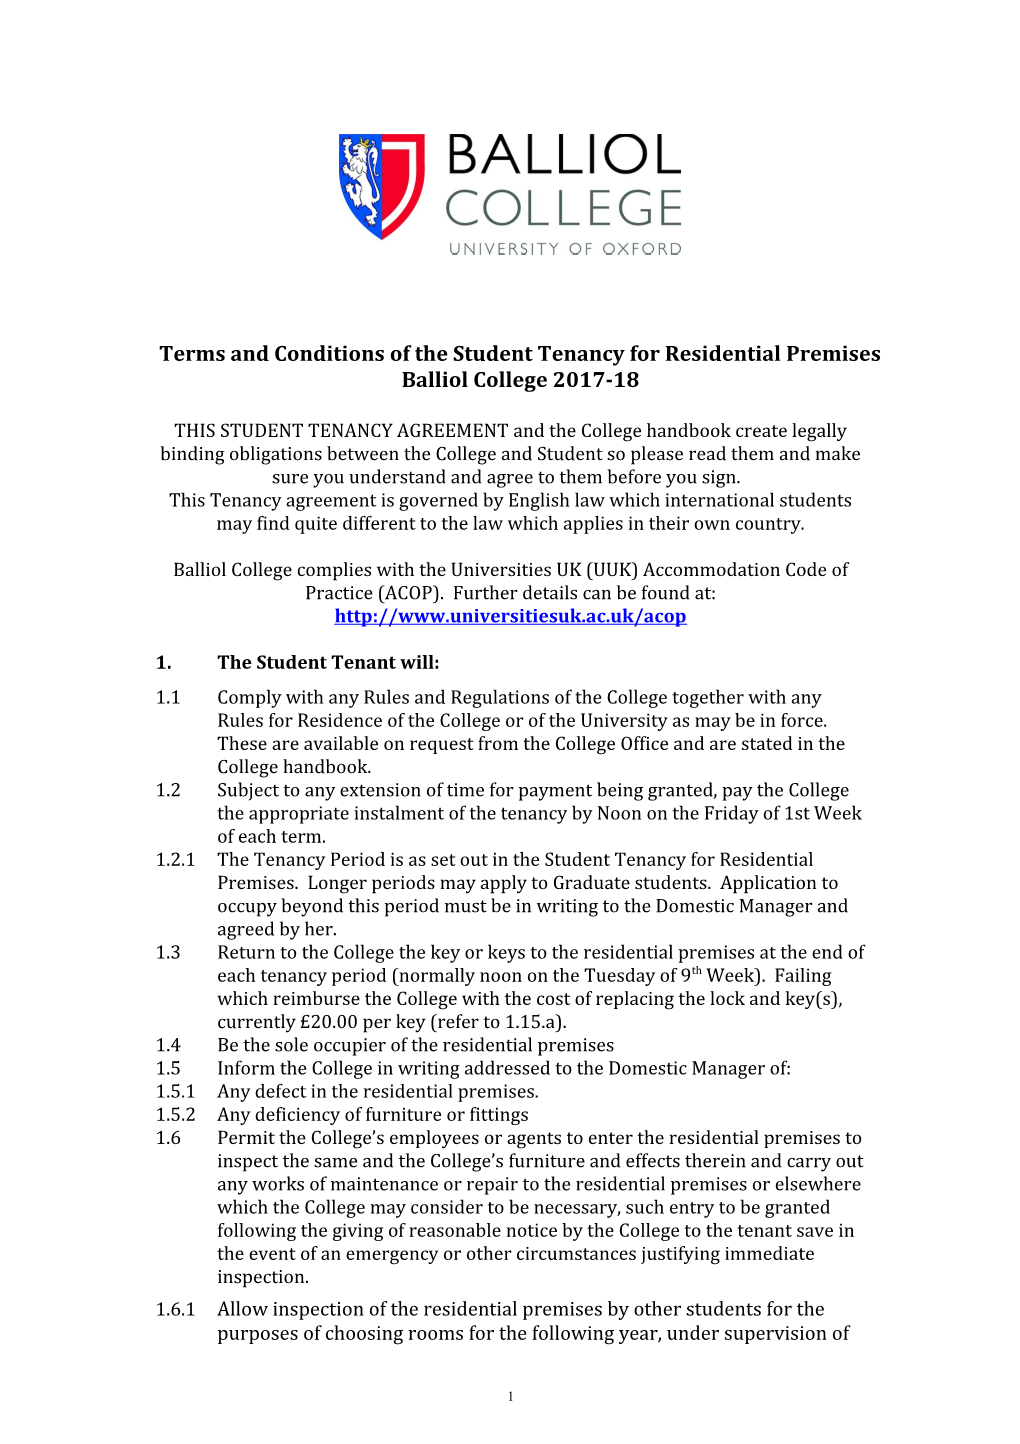 Terms and Conditions of the Student Tenancy for Residential Premises Balliol College 2017-18